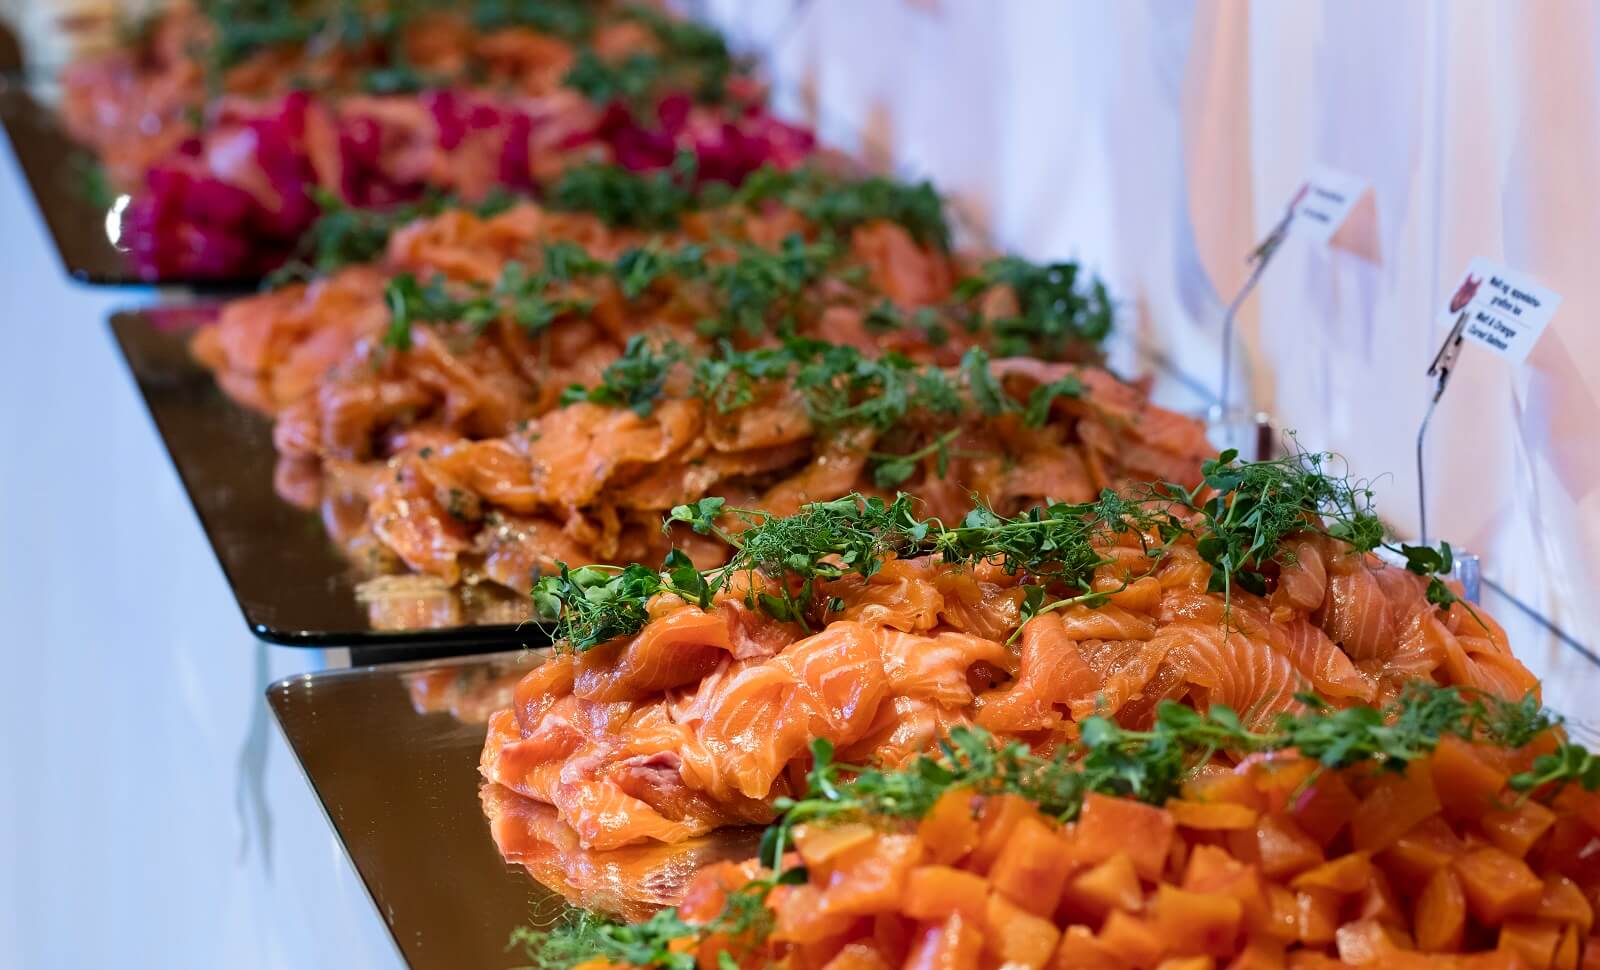 Piles of gravlax or cured salmon decorated with fresh herbs.